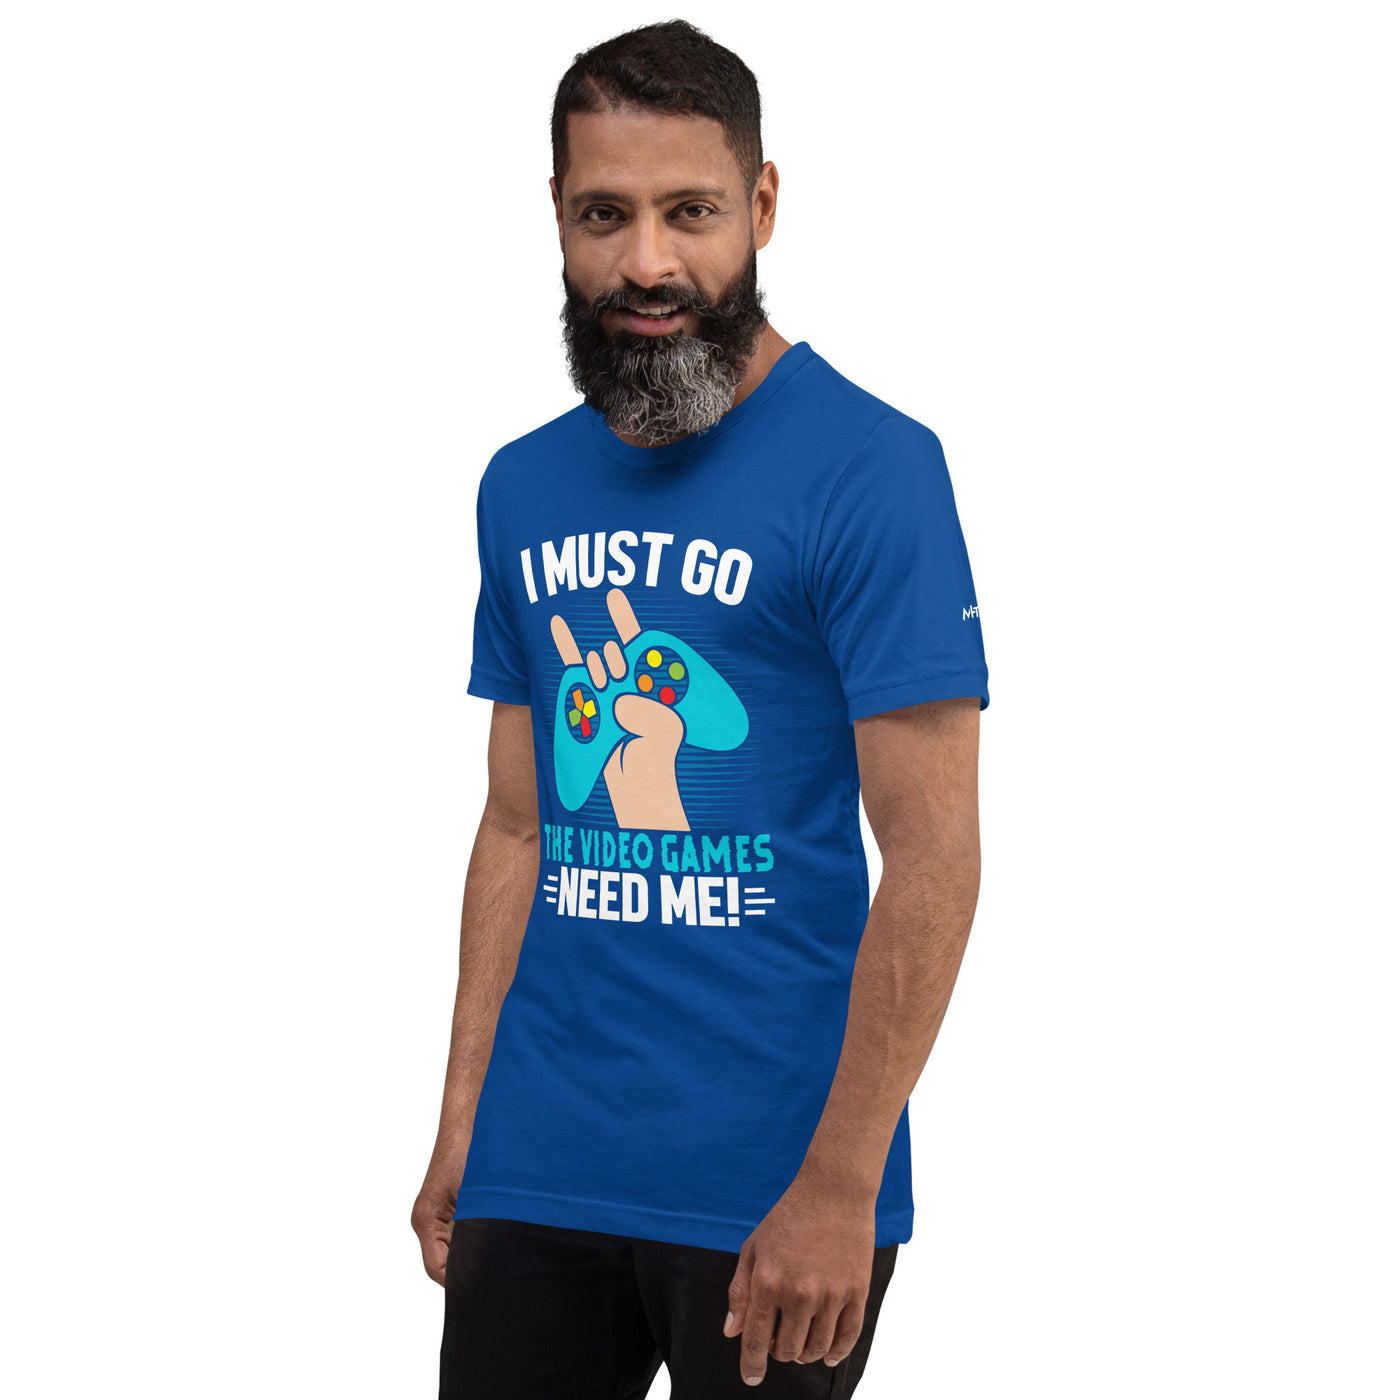 I must go, the Video Games need me Unisex t-shirt